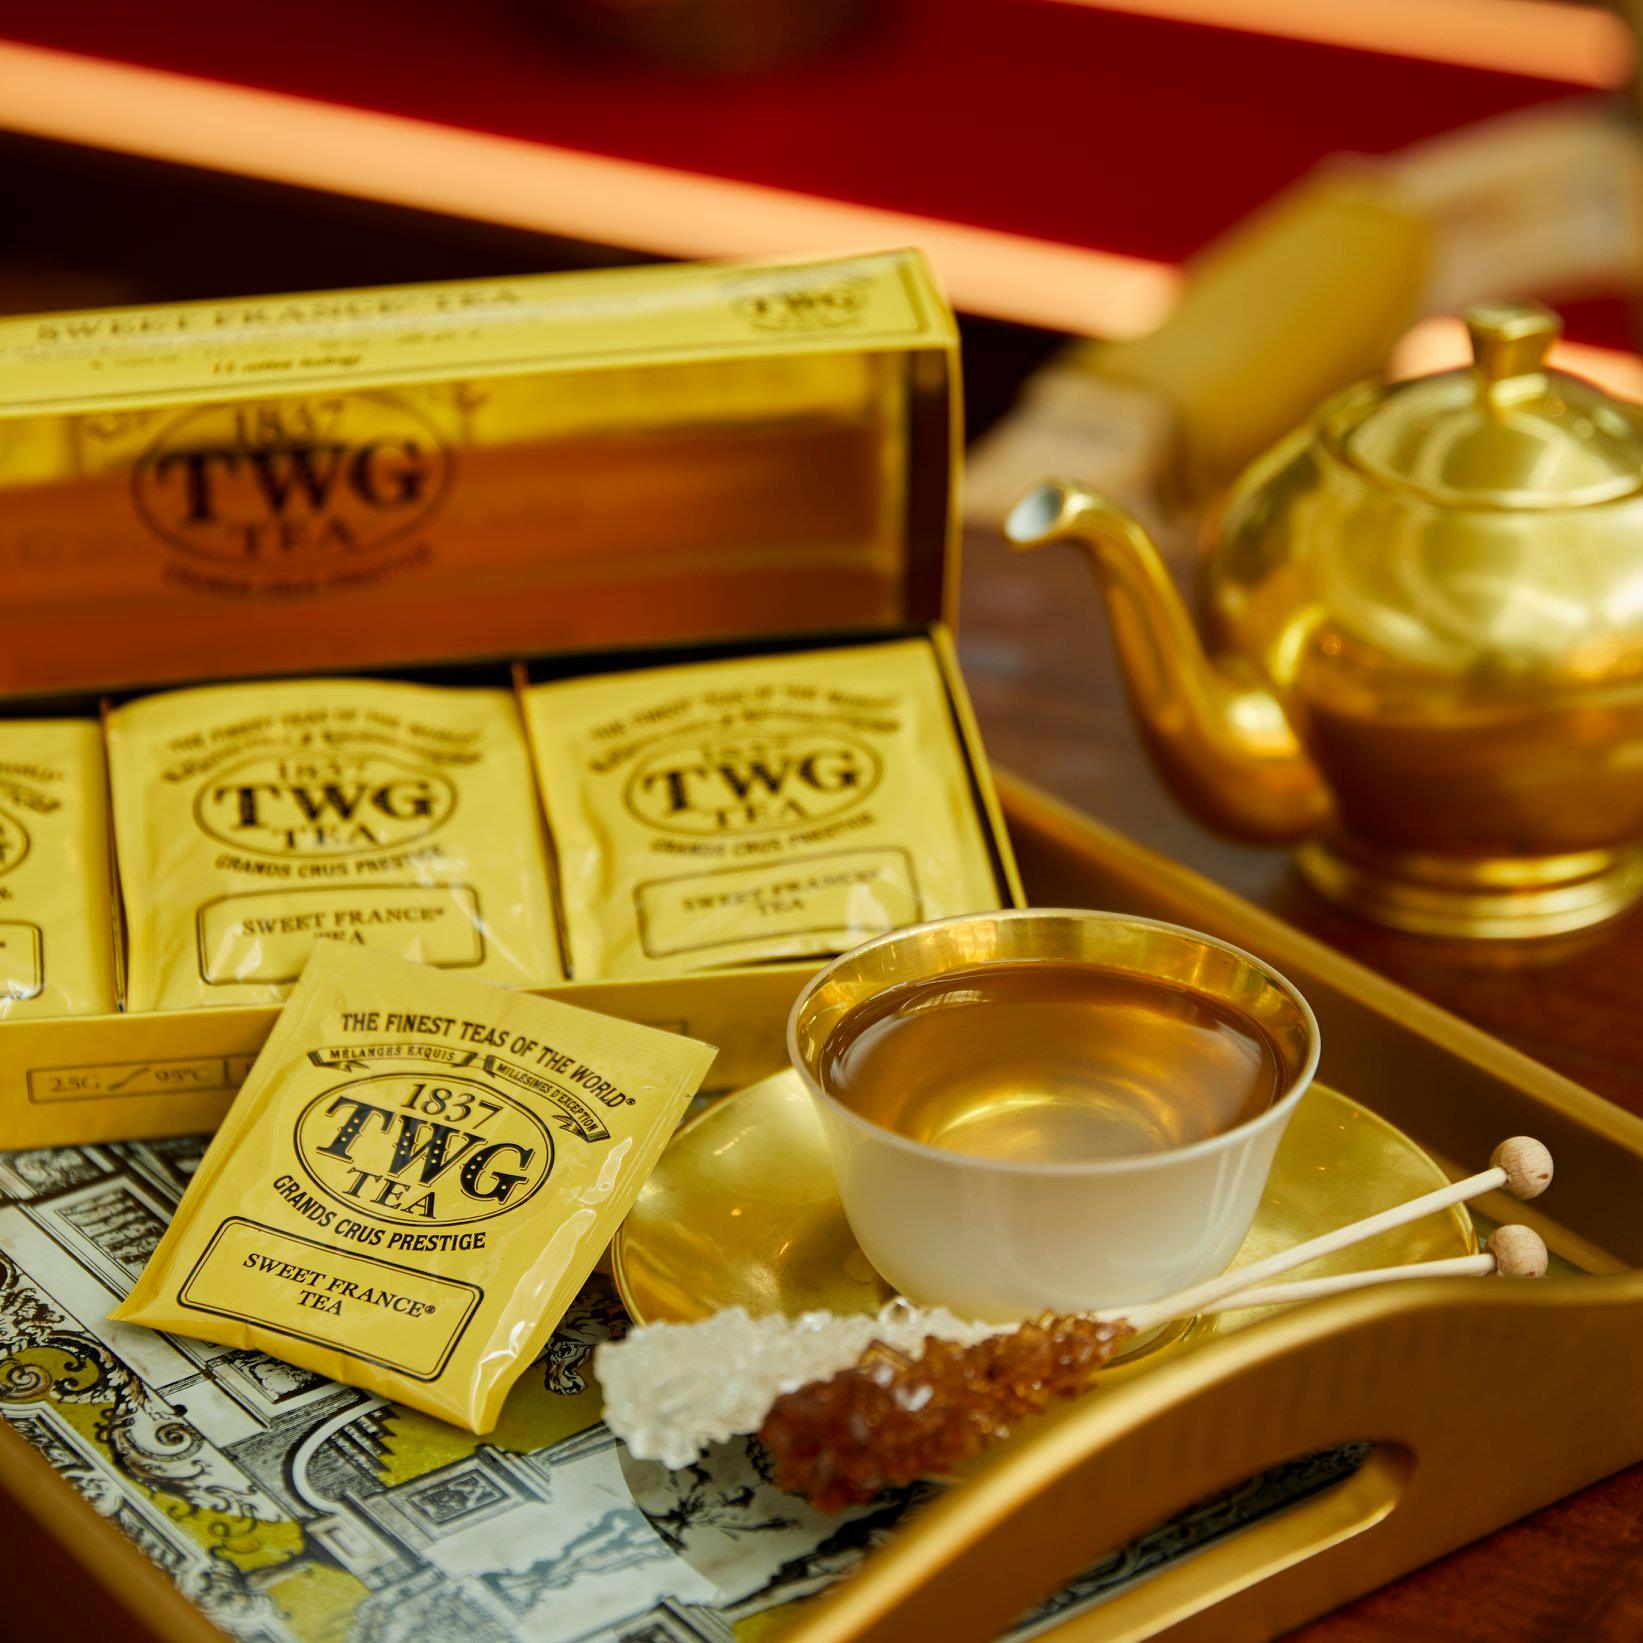 The elegance and refinement of France concentrated in a teacup. This graceful TWG Tea blend combines green tea with exotic flowers and a touch of chamomile to create a fresh and soothing cup. Shop now at TWGTea.Com! #TWGTeaOfficial